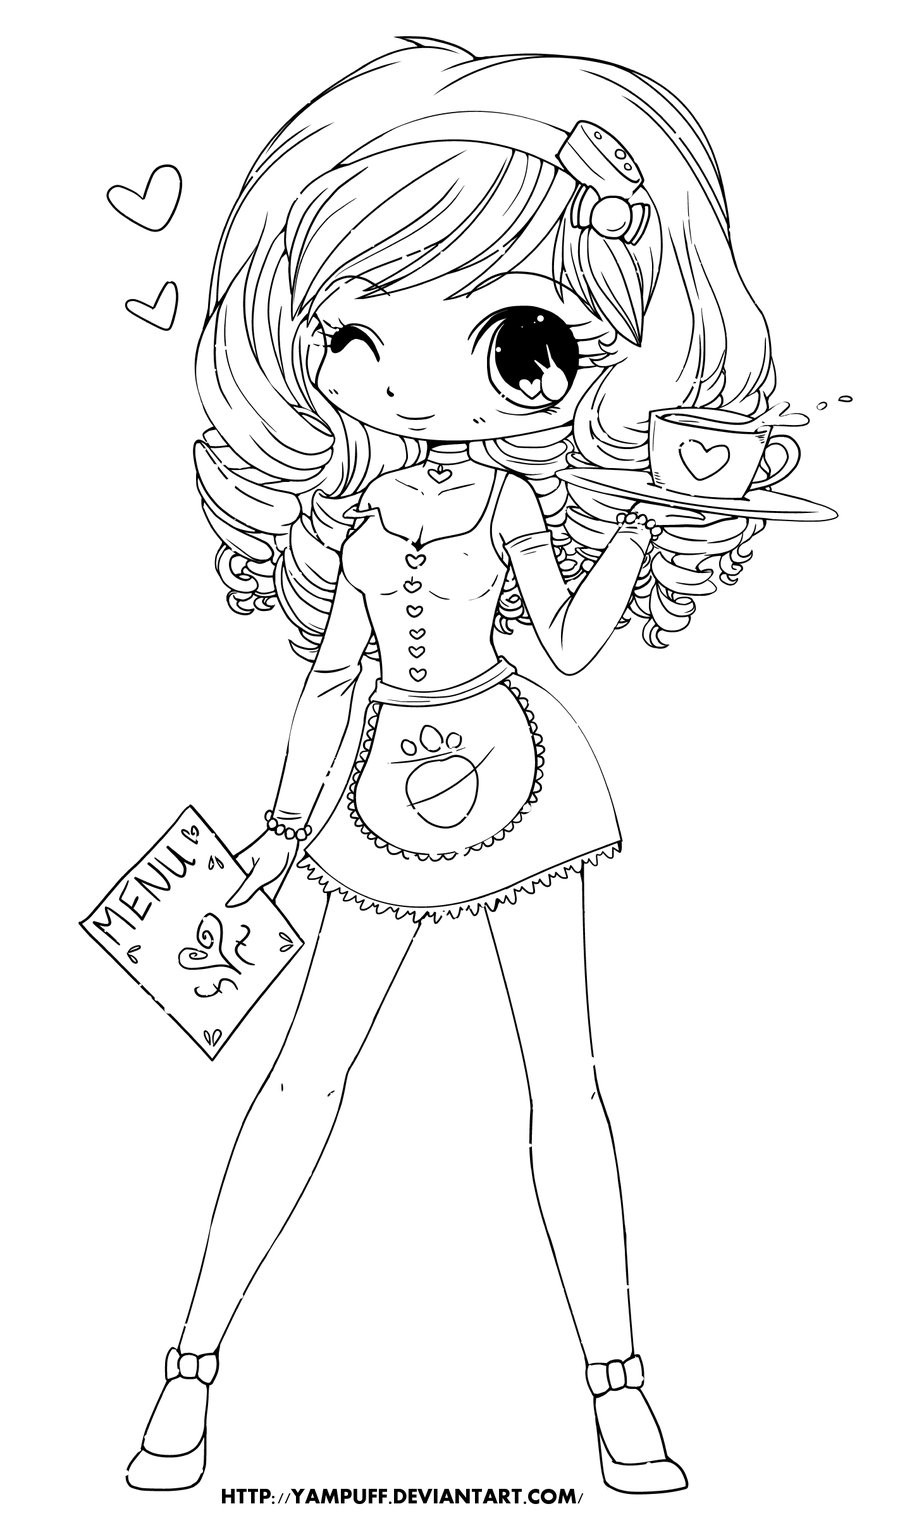 Yampuff Coloring Pages
 Chloe Lineart by YamPuff on DeviantArt